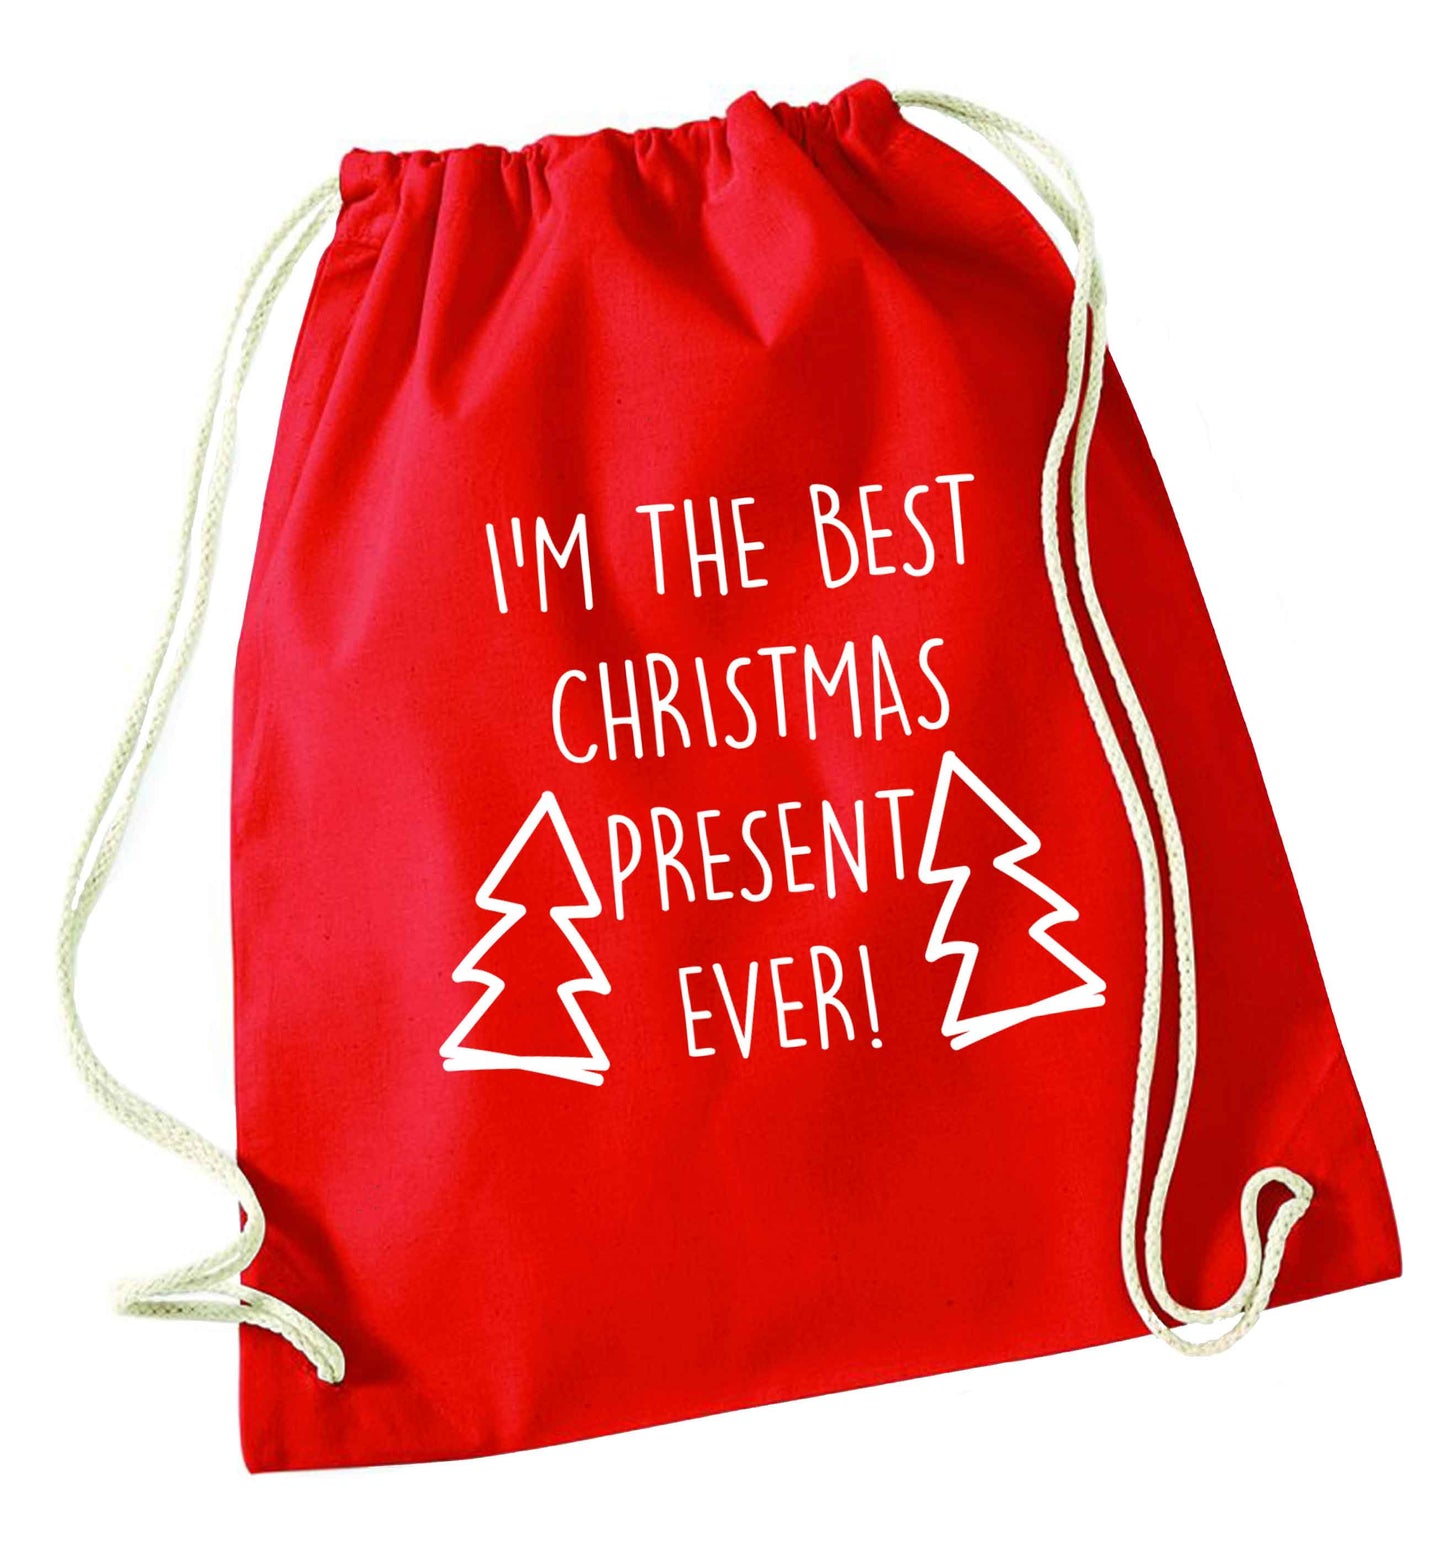 I'm the best Christmas present ever red drawstring bag 